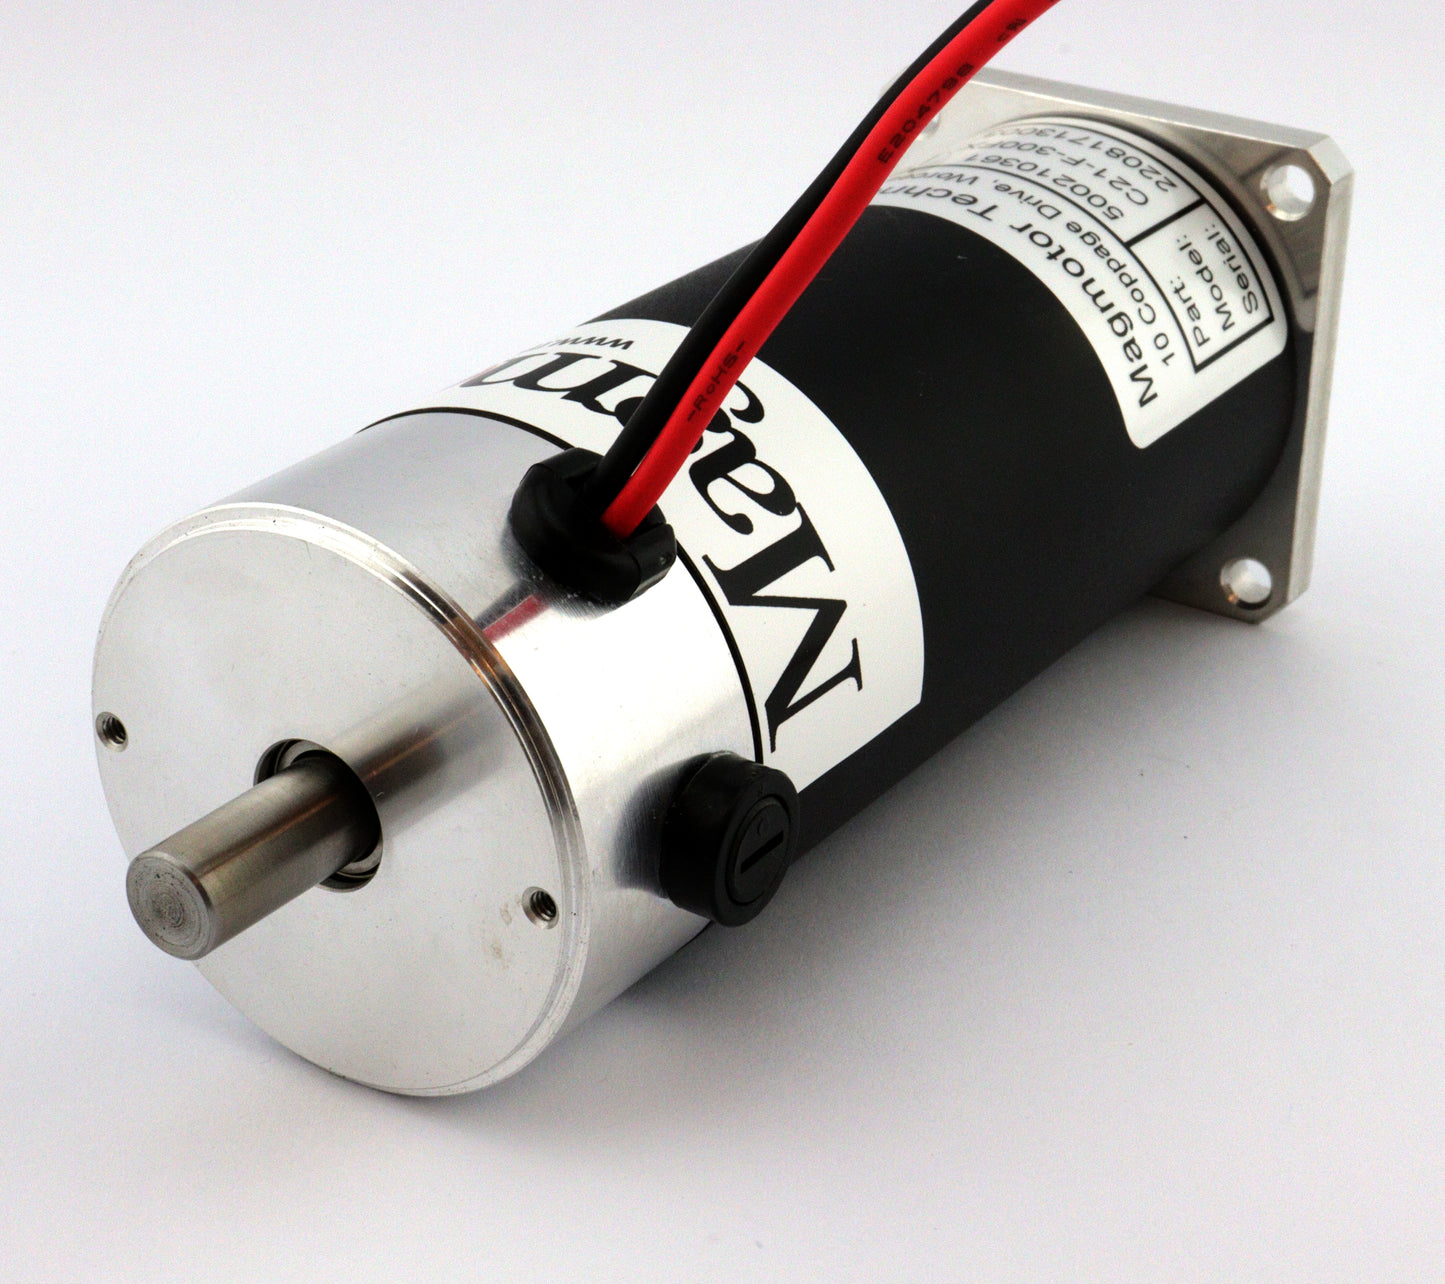 Magmotor C21-f-300FX Brushed Motor 500210361 back View